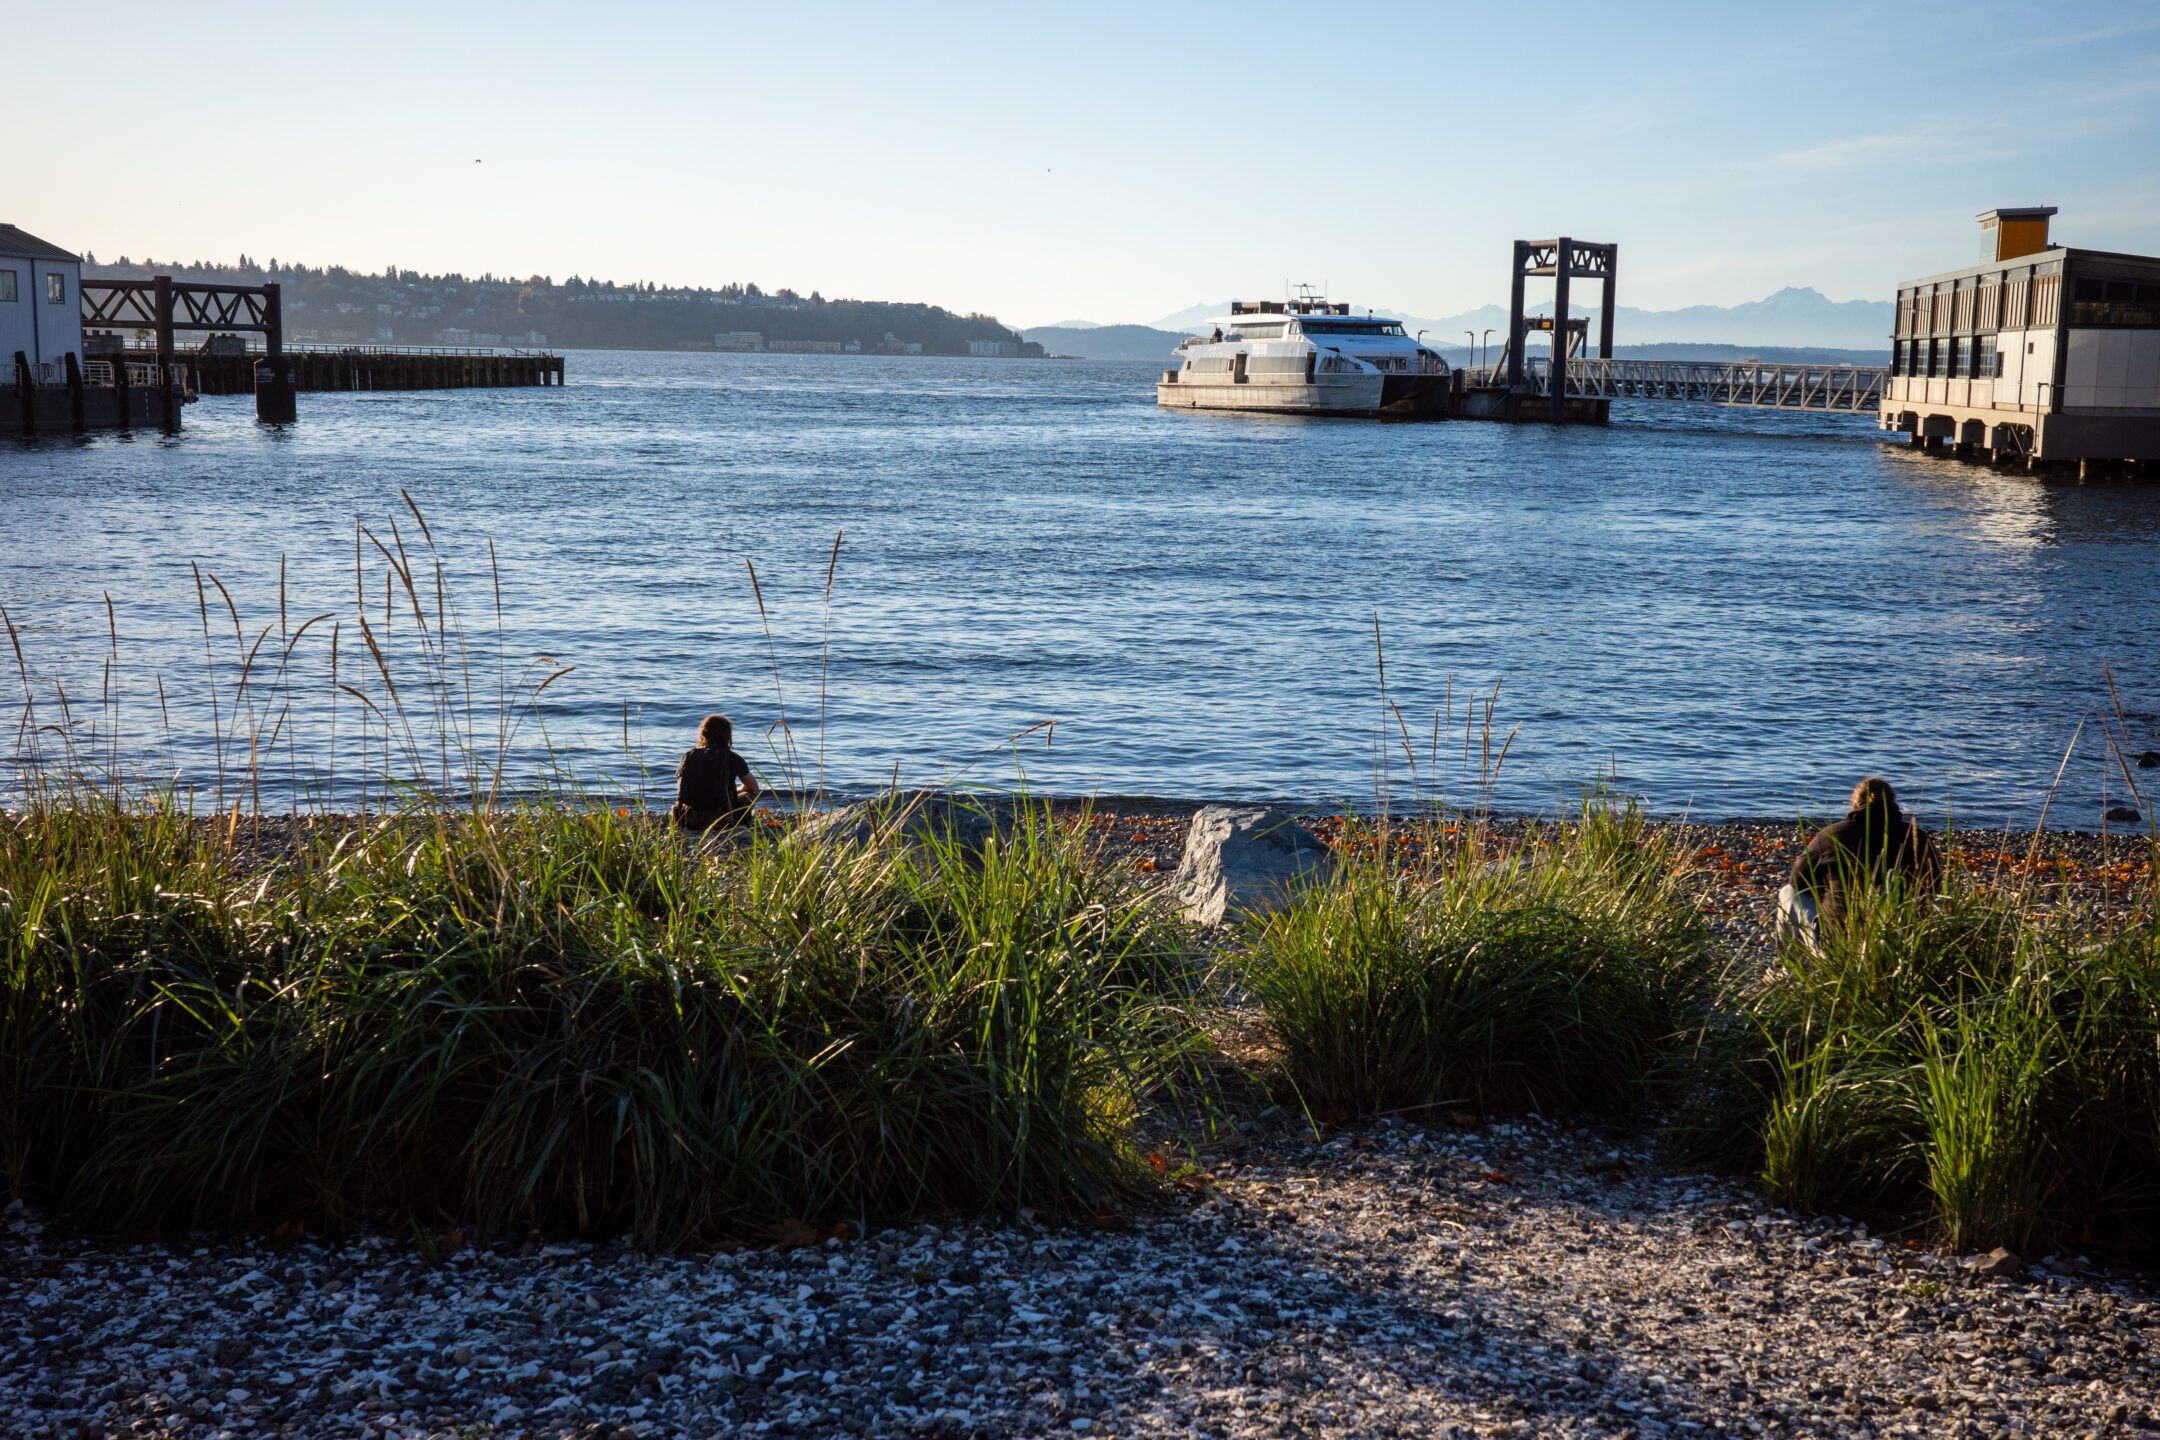 Visitors can find a moment of peace and serenity as they take in the views of the Puget Sound from Habitat Beach.